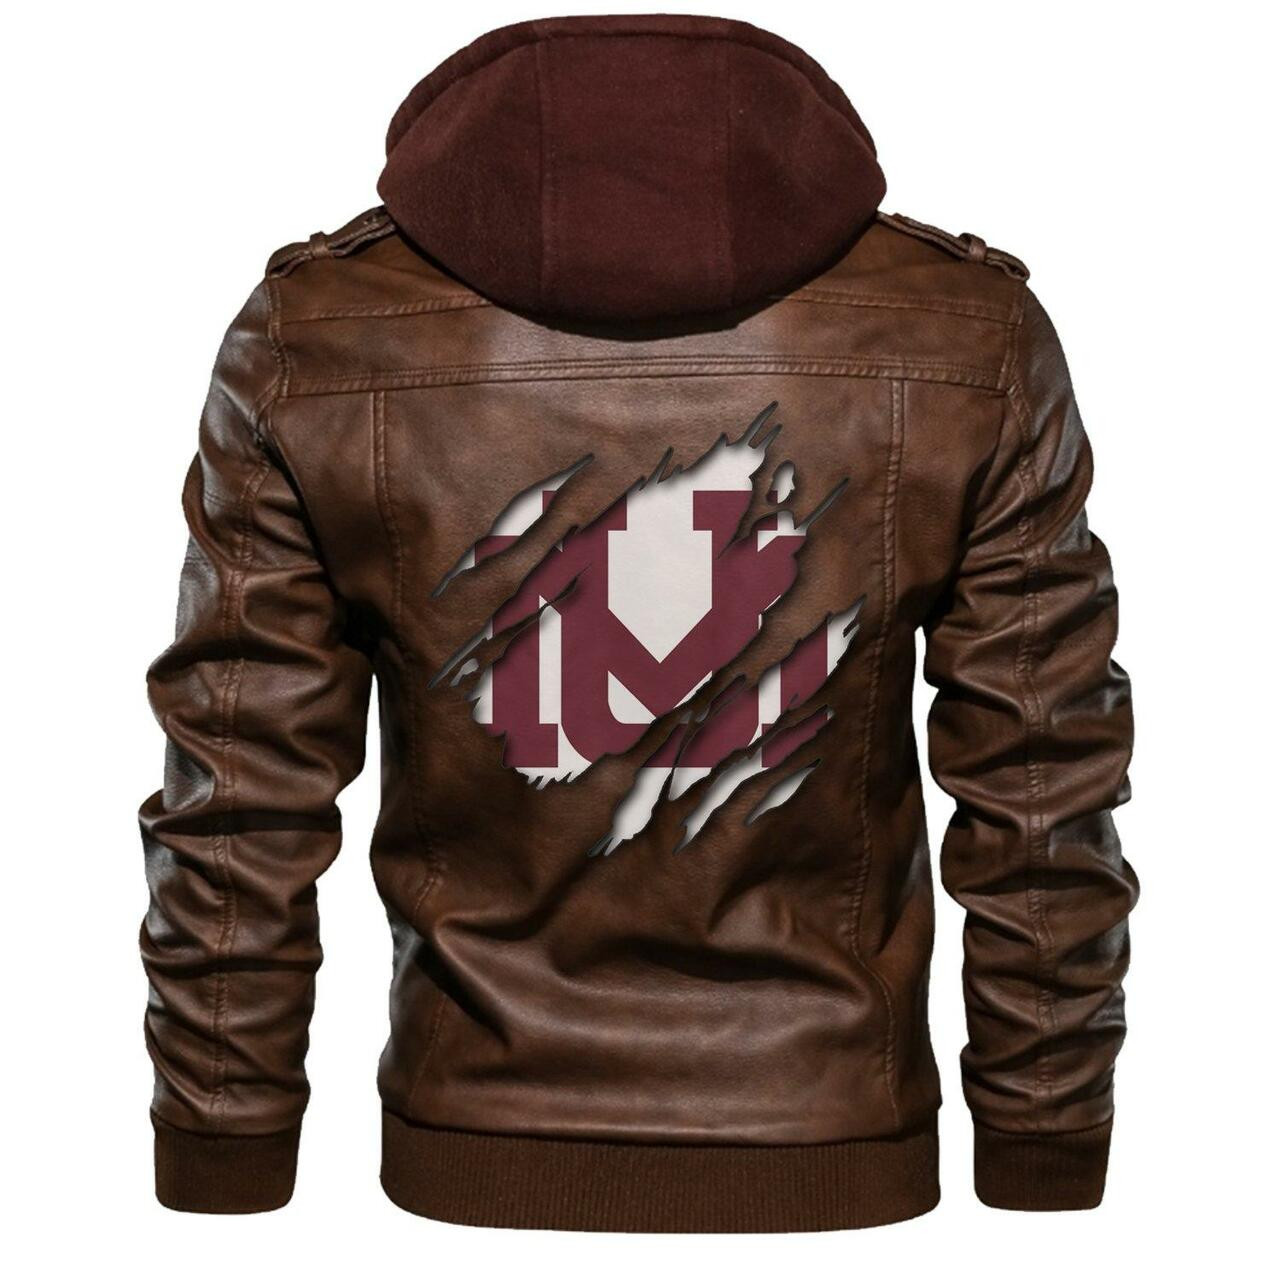 This leather Jacket will look great on you and make you stand out from the crowd 119